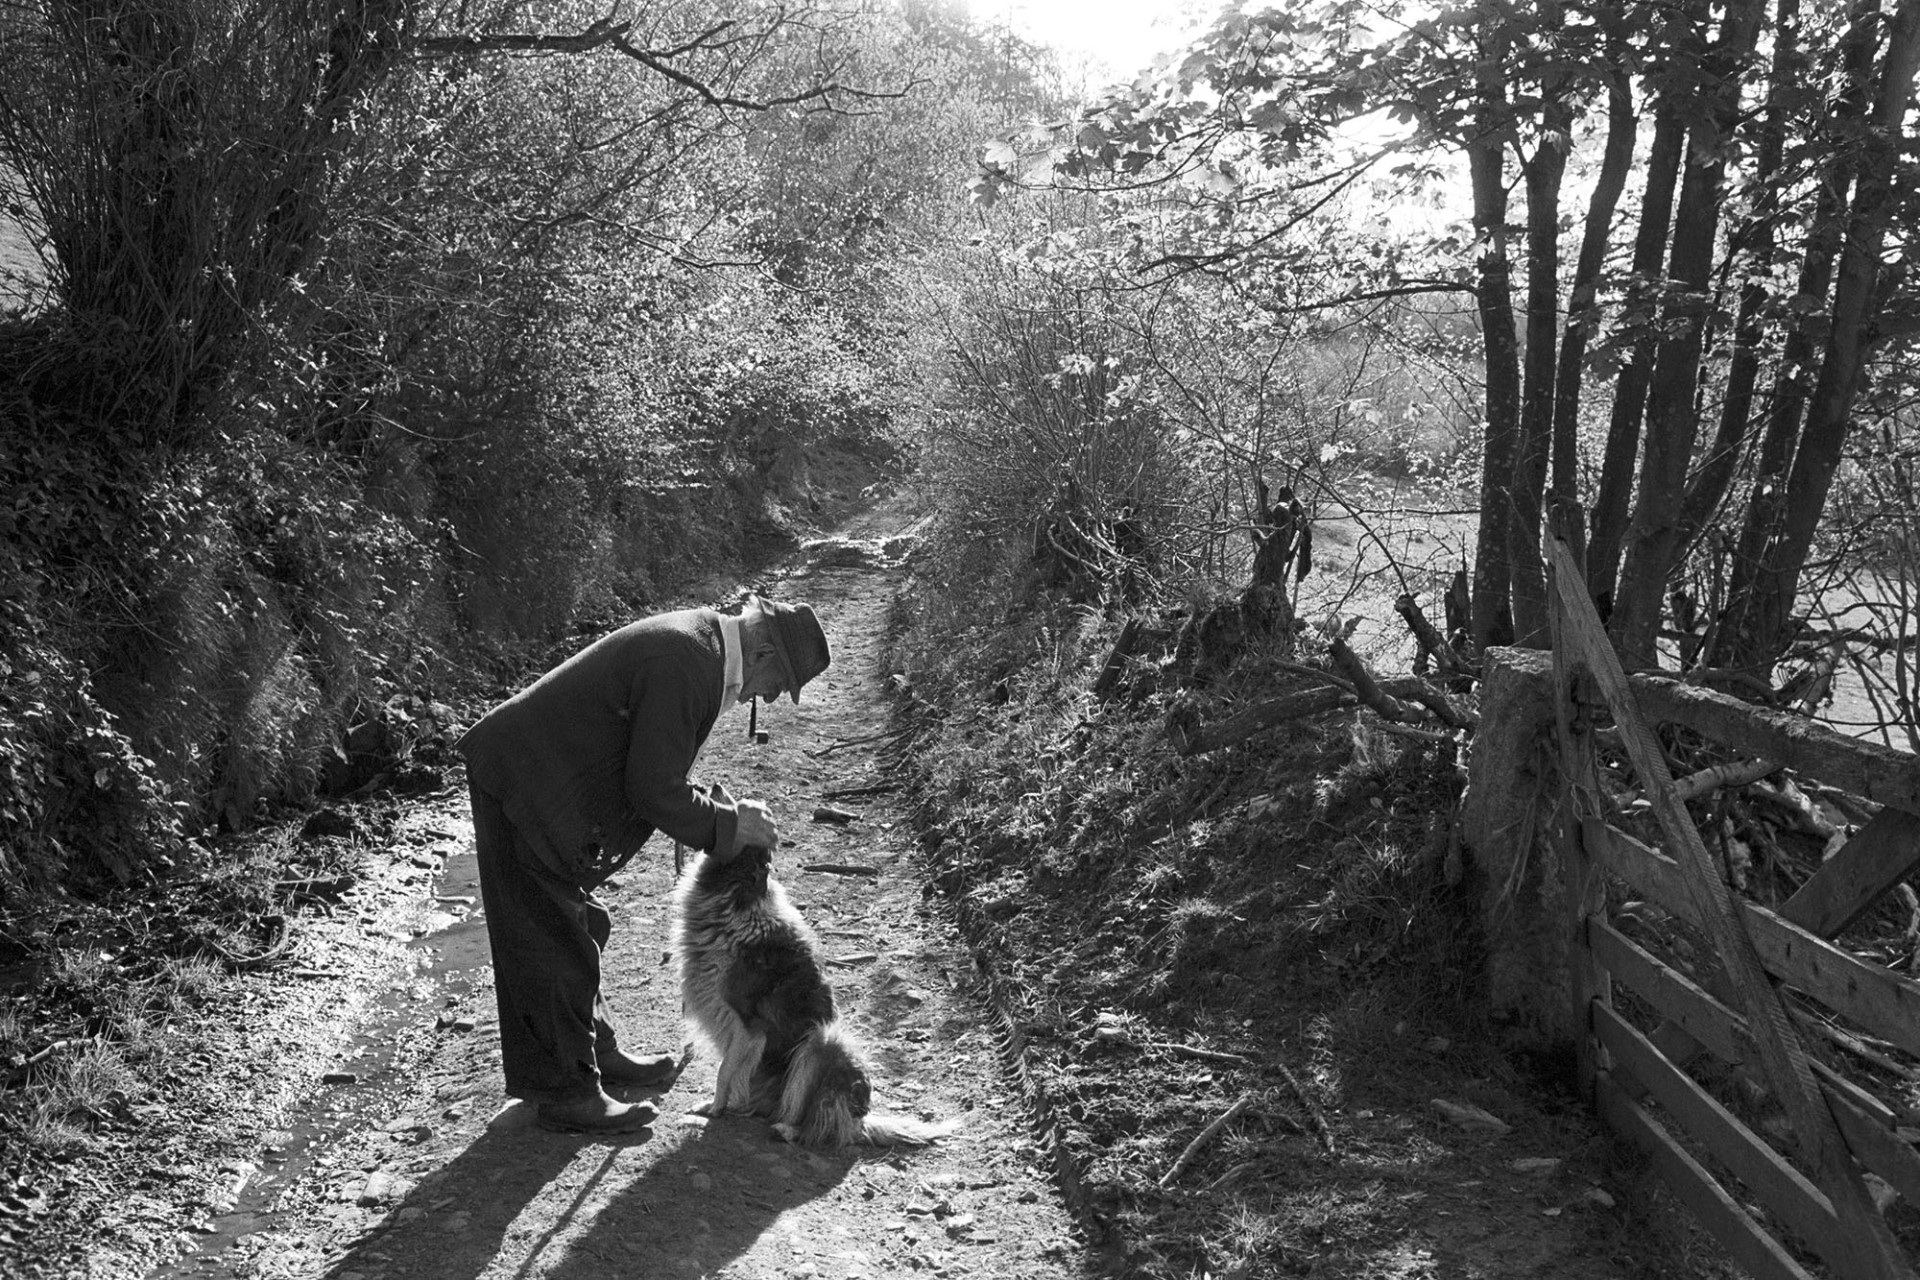 Shepherd farmer patting dog in wooded track, early morning light. 
[Archie Parkhouse stroking his dog, Sally, in a muddy sunlit lane by a wooden field gate, near Budds Mills, Millhams, Dolton. He is smoking a pipe.]